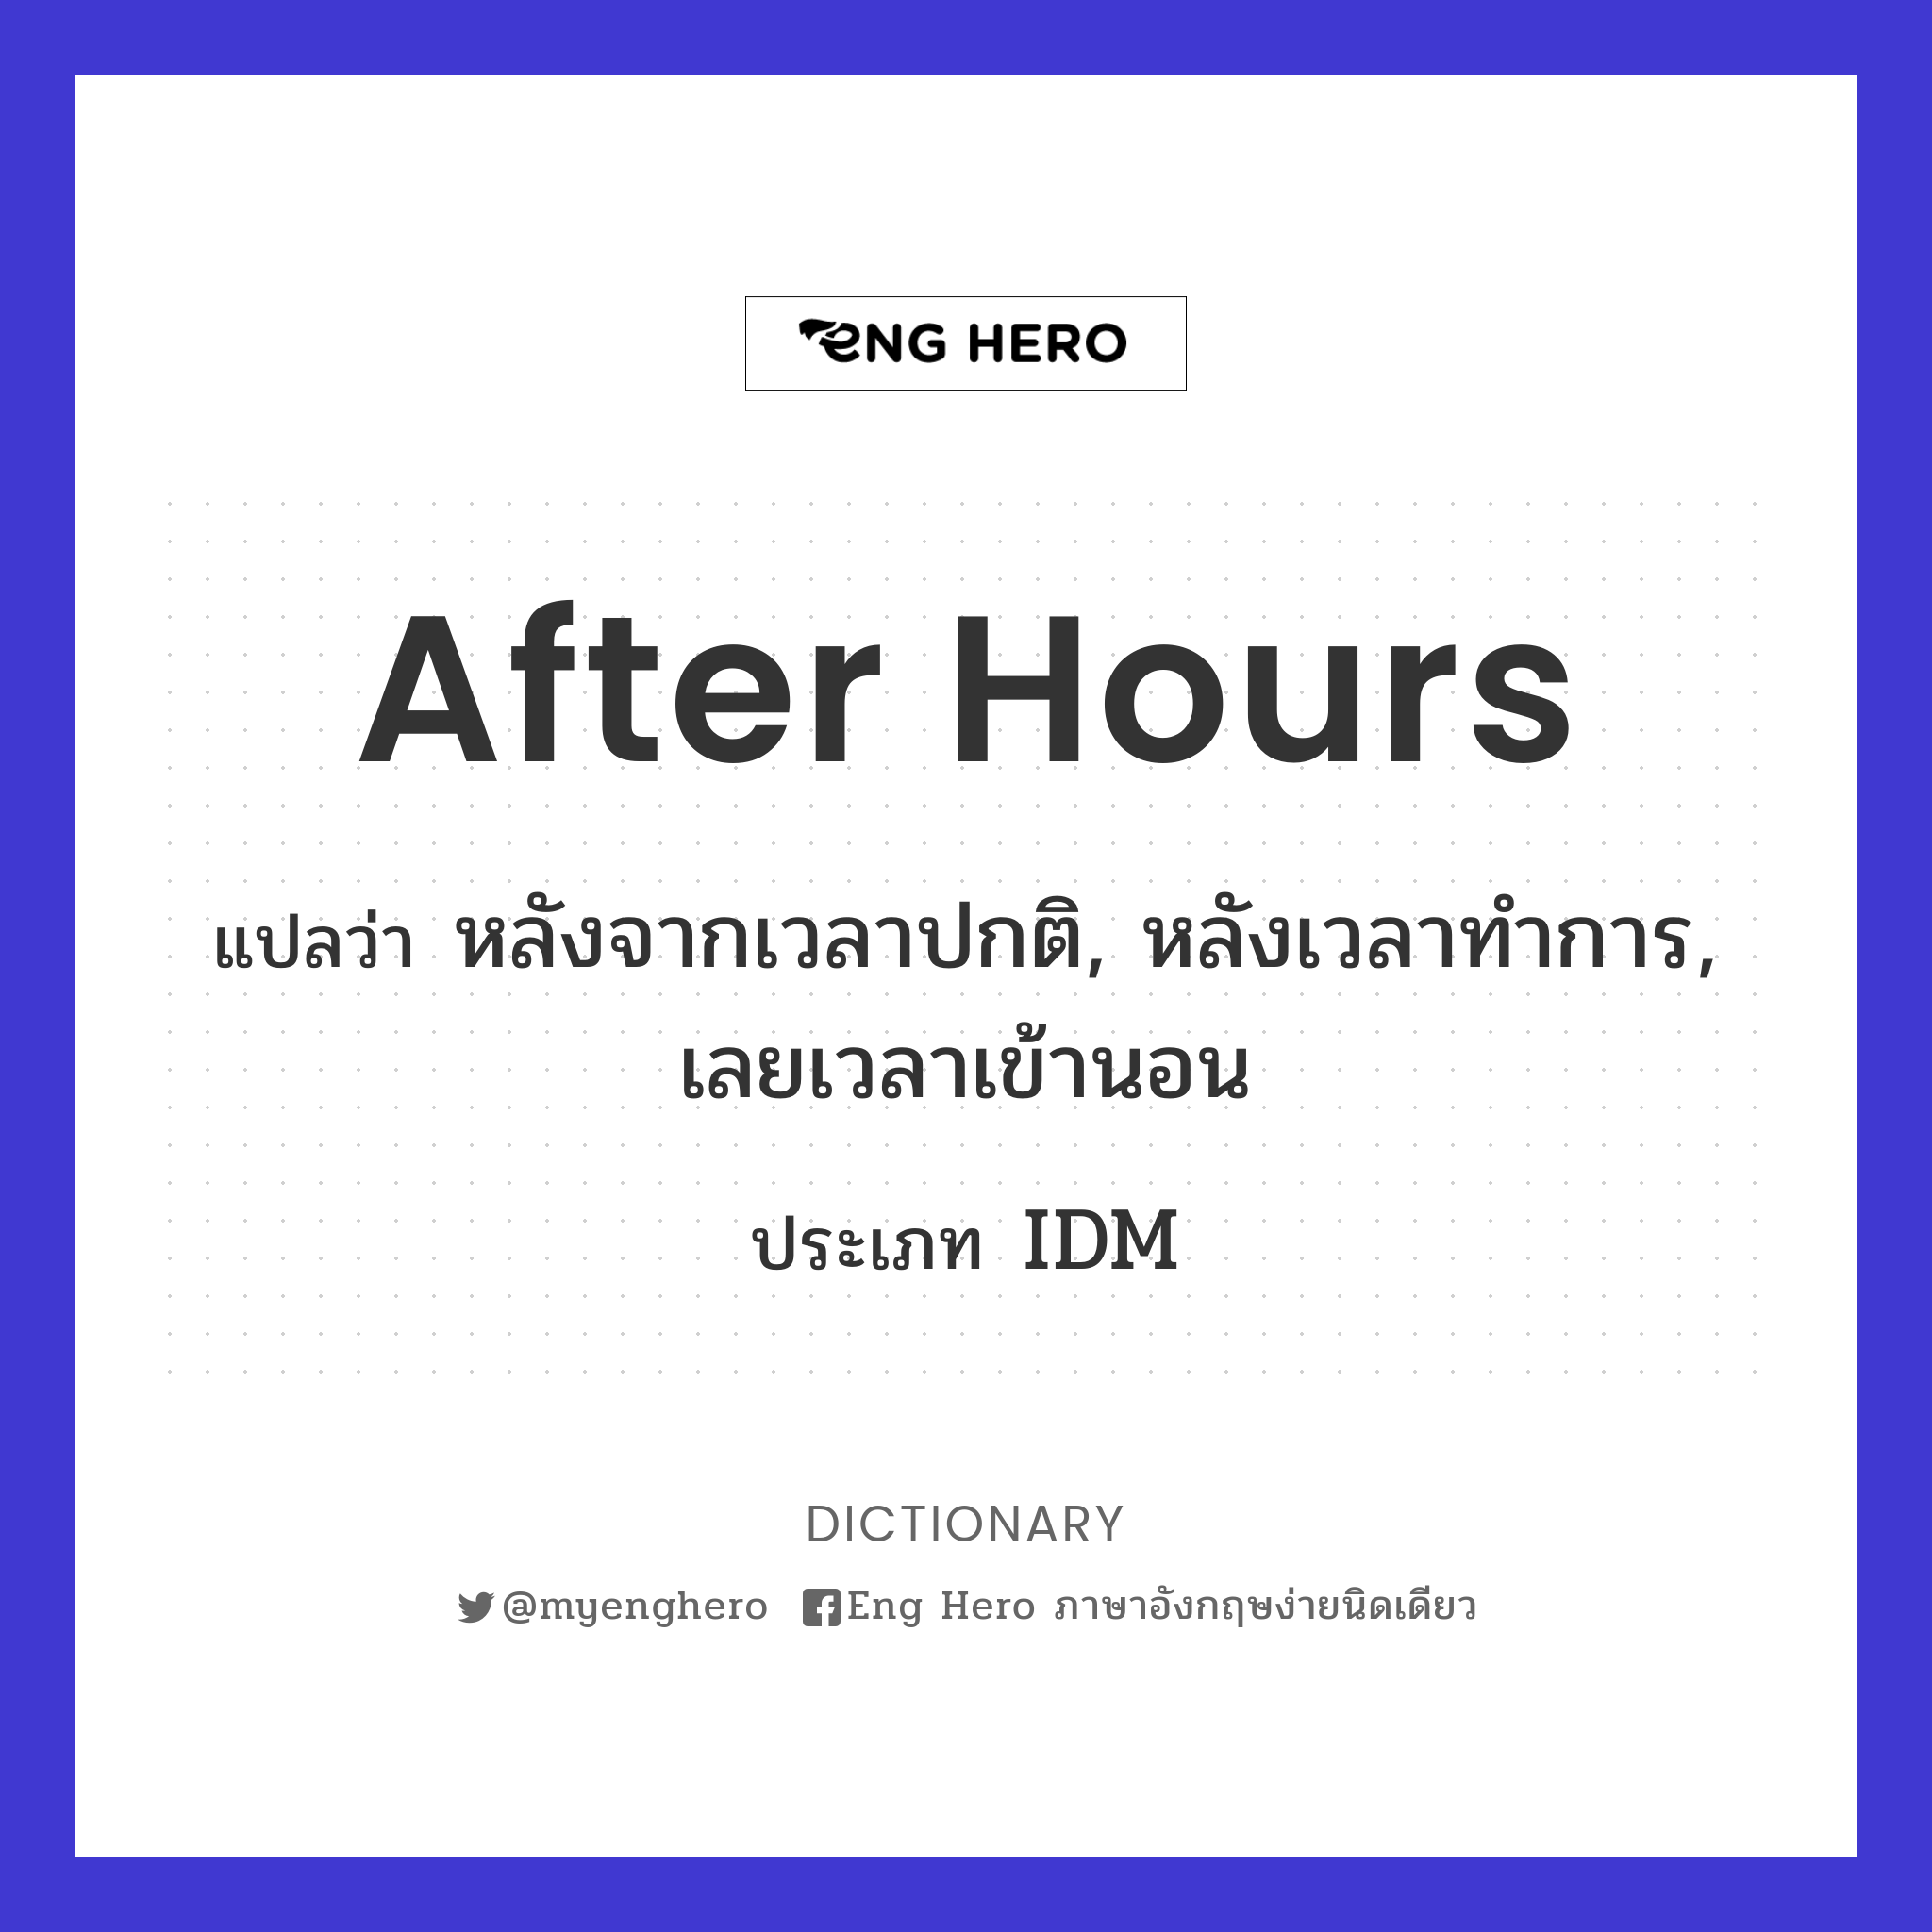 after hours